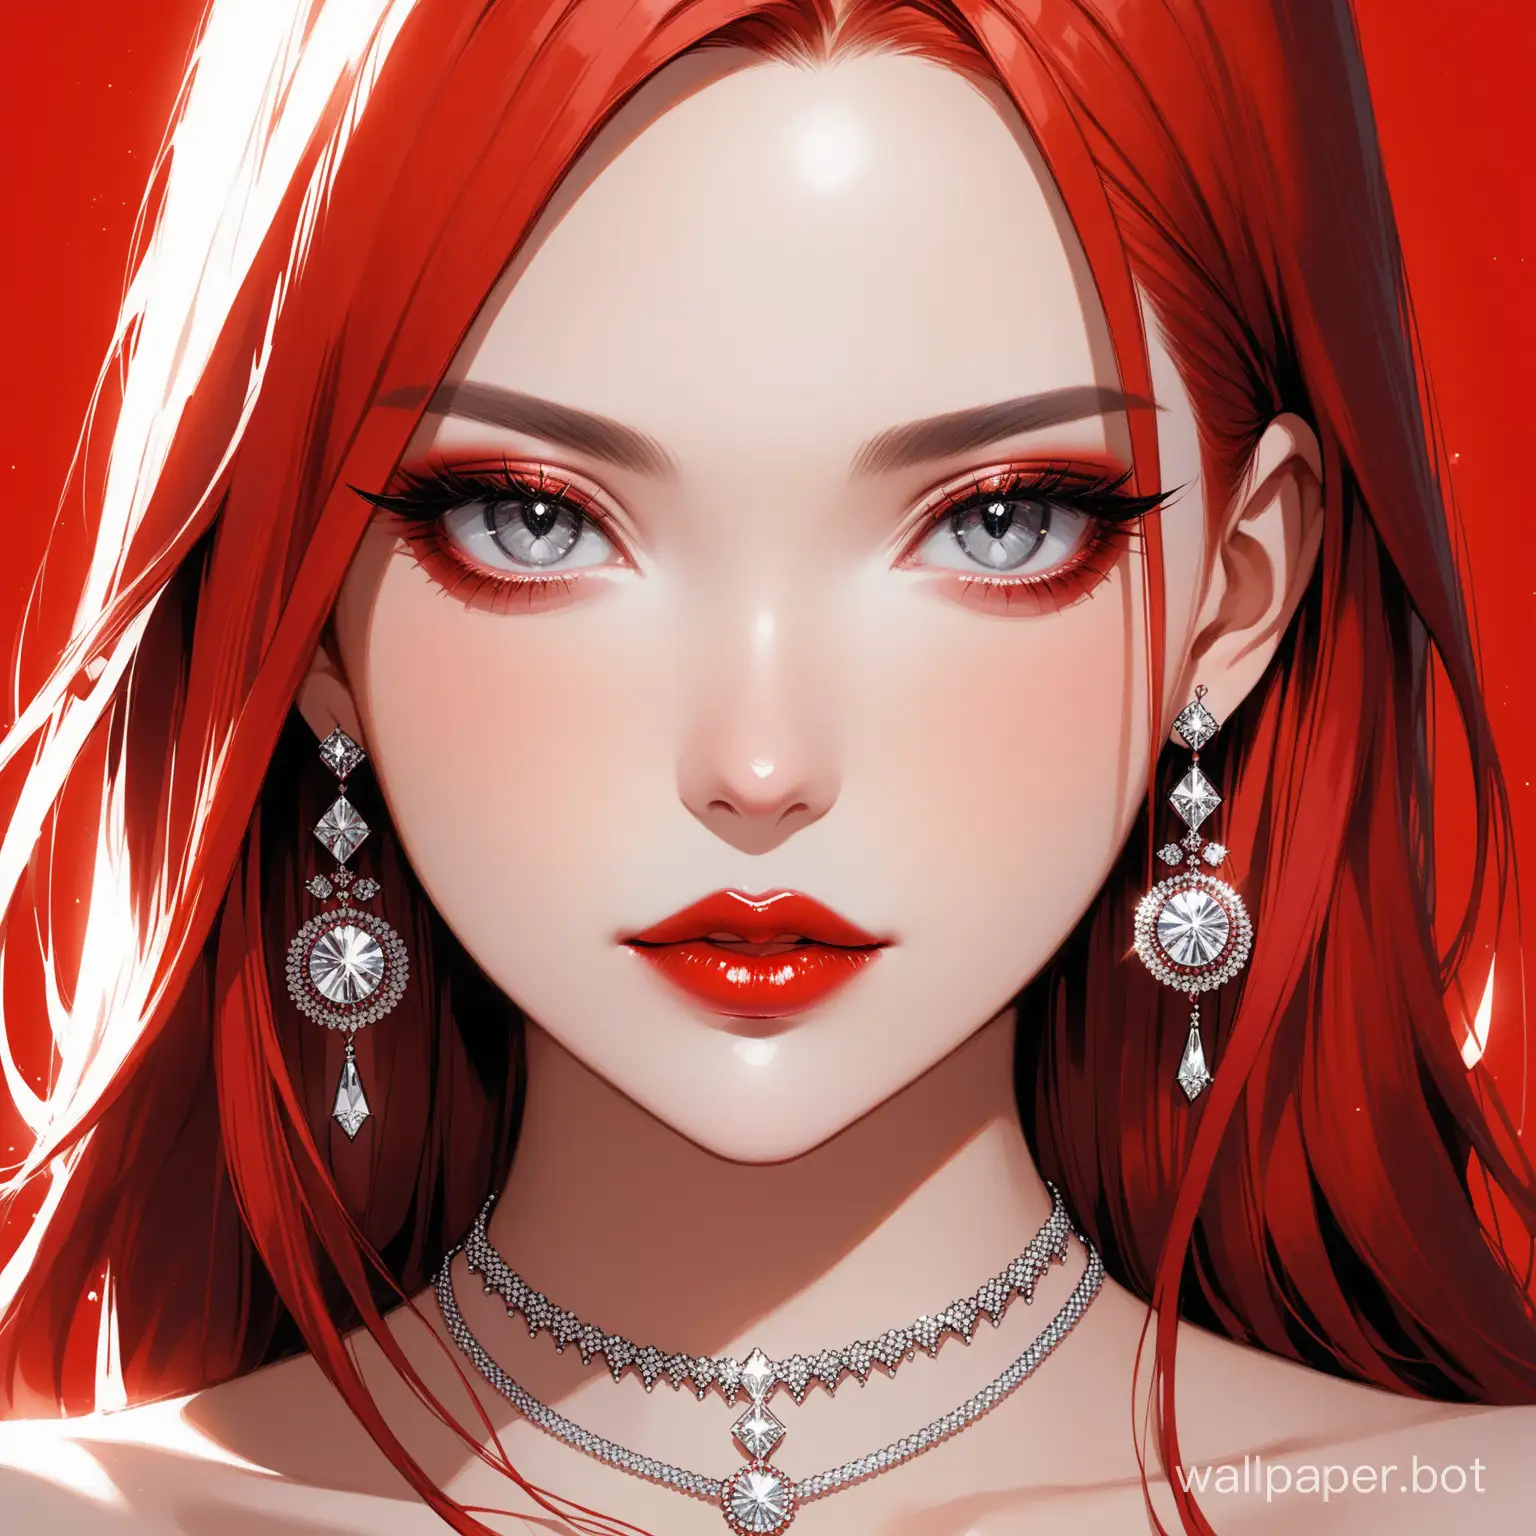 Aesthetic-CloseUp-Portrait-of-a-Girl-with-Red-Hair-and-Jewelry-on-Red-Background